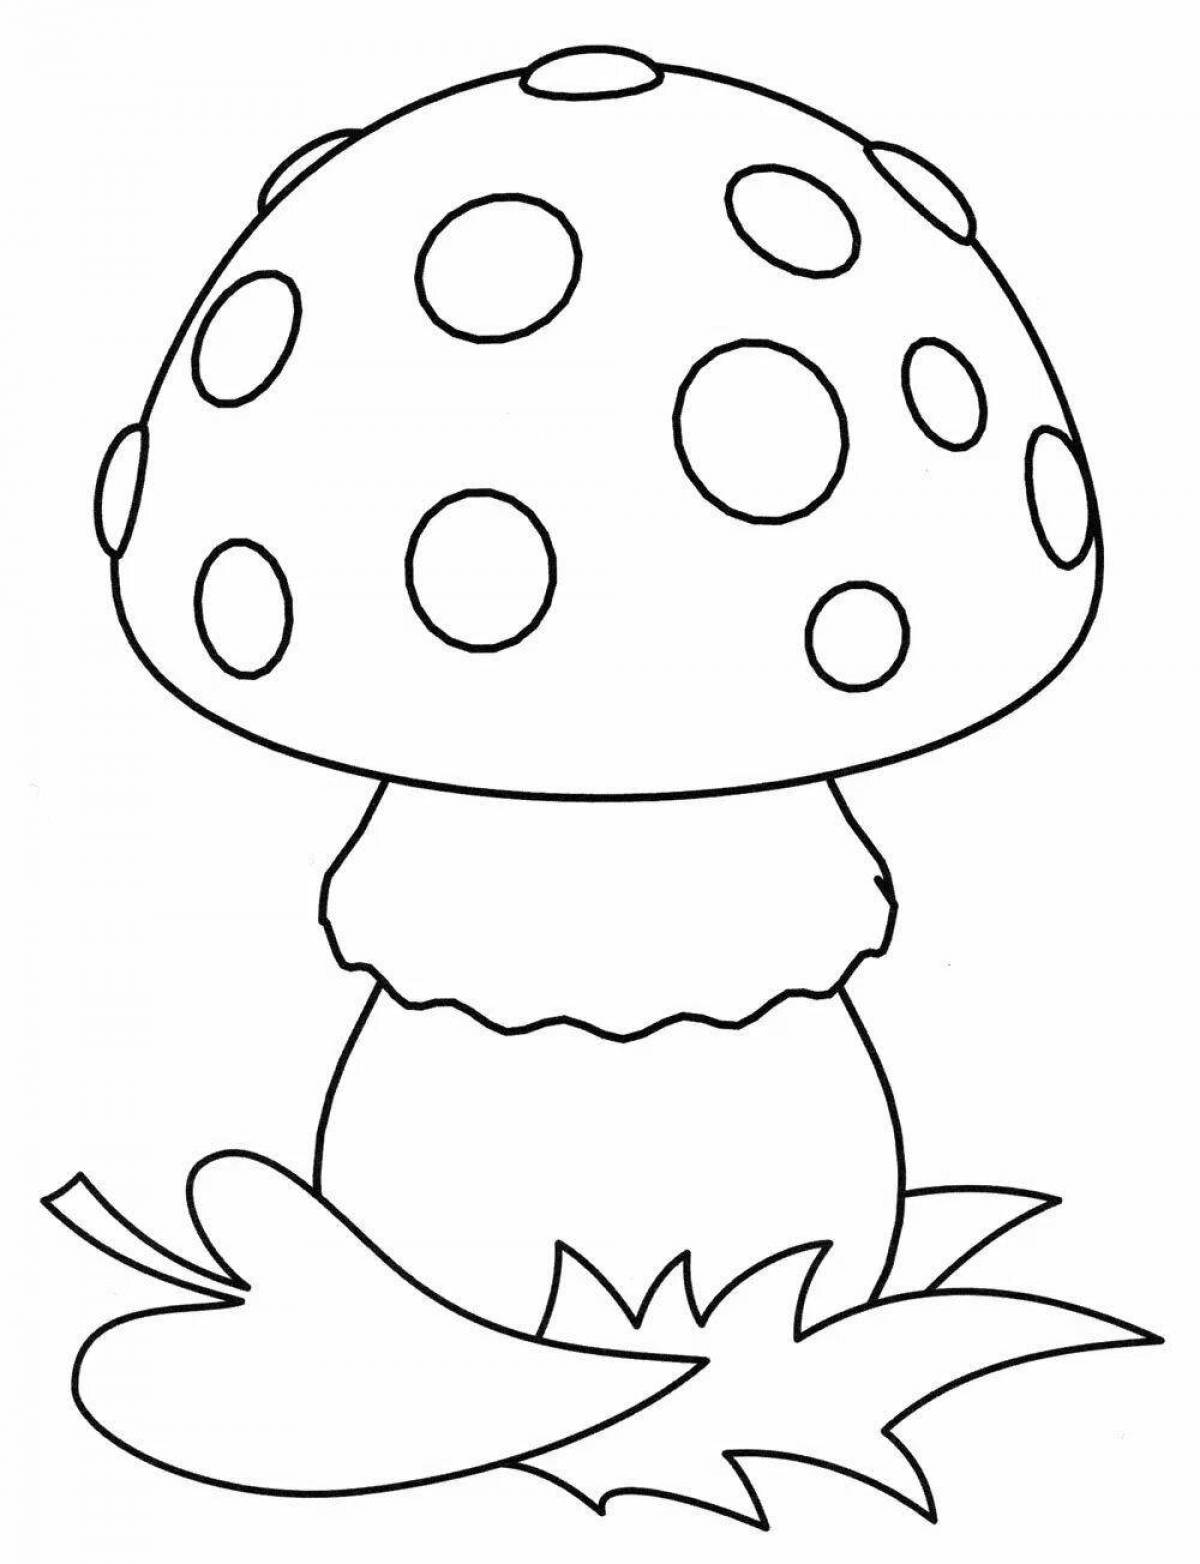 Live mushroom coloring pages for 3-4 year olds